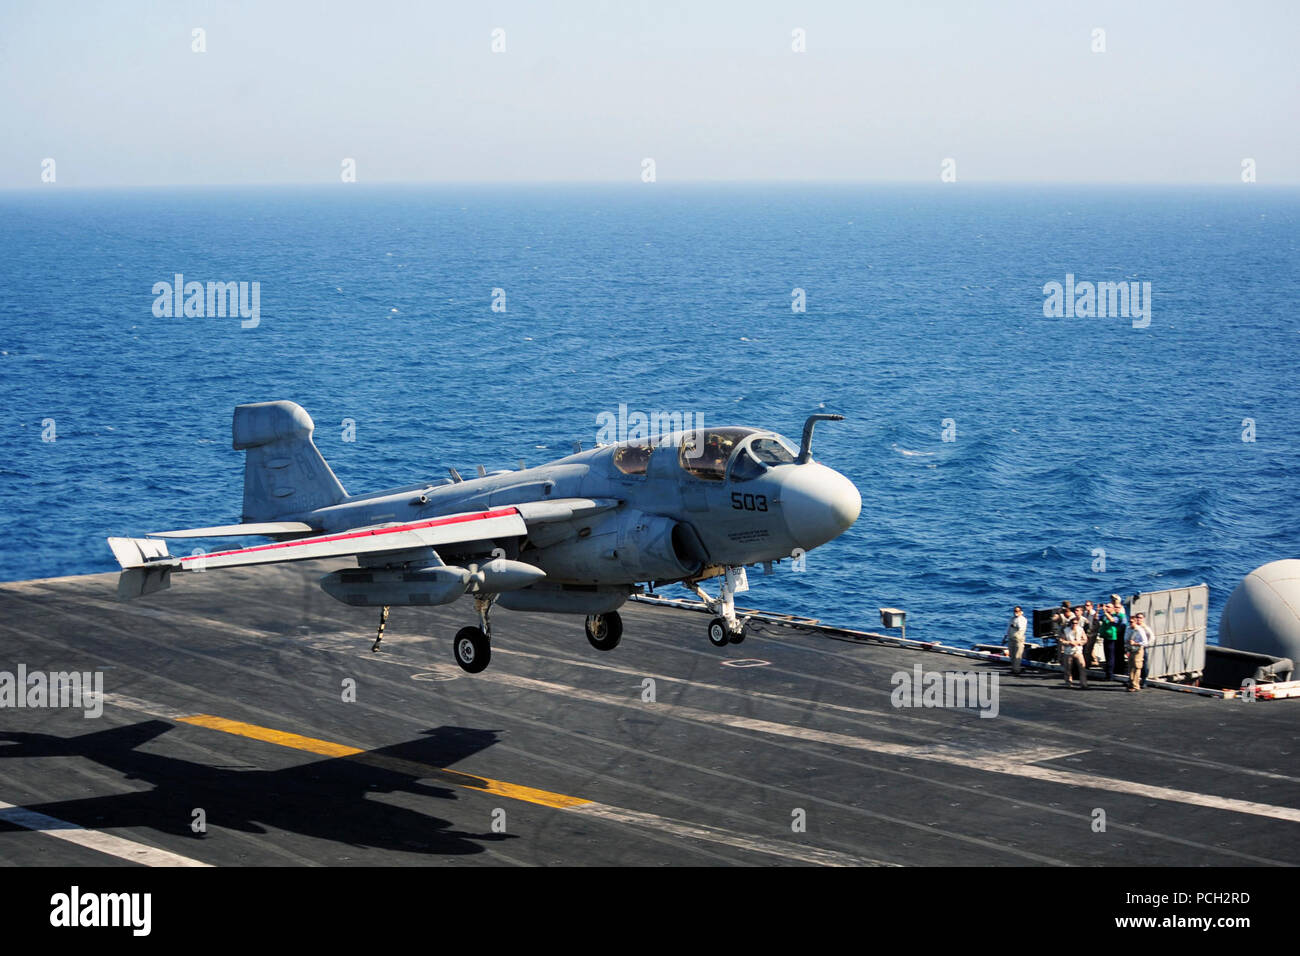 ARABIAN GULF (July 21, 2014) An EA-6B Prowler assigned to the Garudas of Electronic Attack Squadron (VAQ) 134 prepares to land on the flight deck of the aircraft carrier USS George H.W. Bush (CVN 77). George H.W. Bush is supporting maritime security operations and theater security cooperation efforts in the U.S. 5th Fleet area of responsibility. Stock Photo